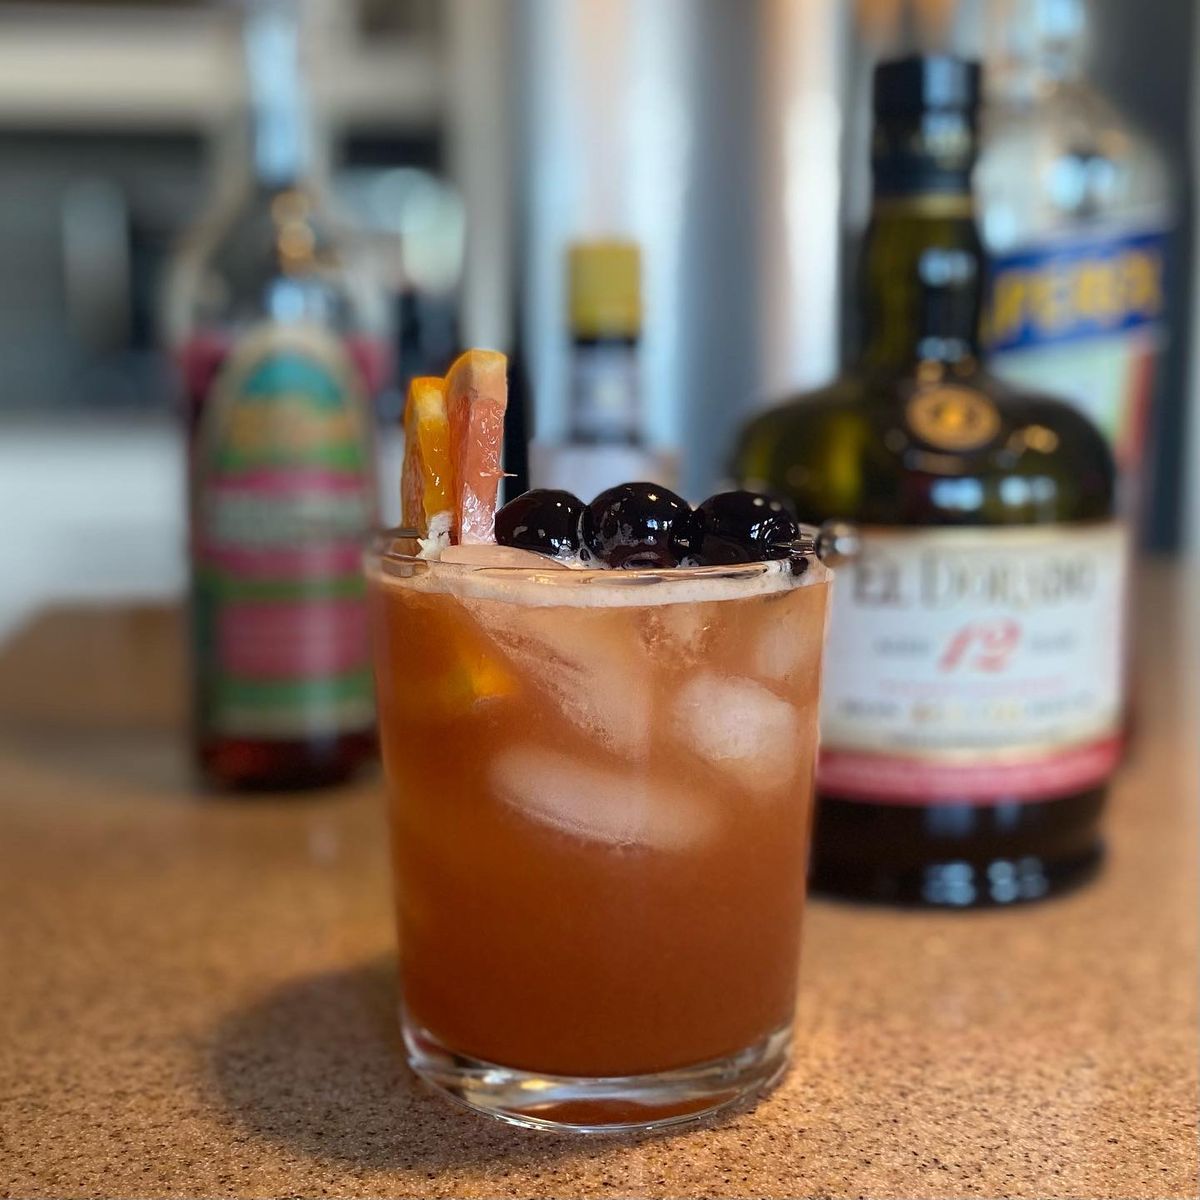 As if making dope syrups wasn’t enough, BG Reynolds provides the bangin’ recipes to match.

This one came off the Lush Grenadine bottle, and it is fantastic!